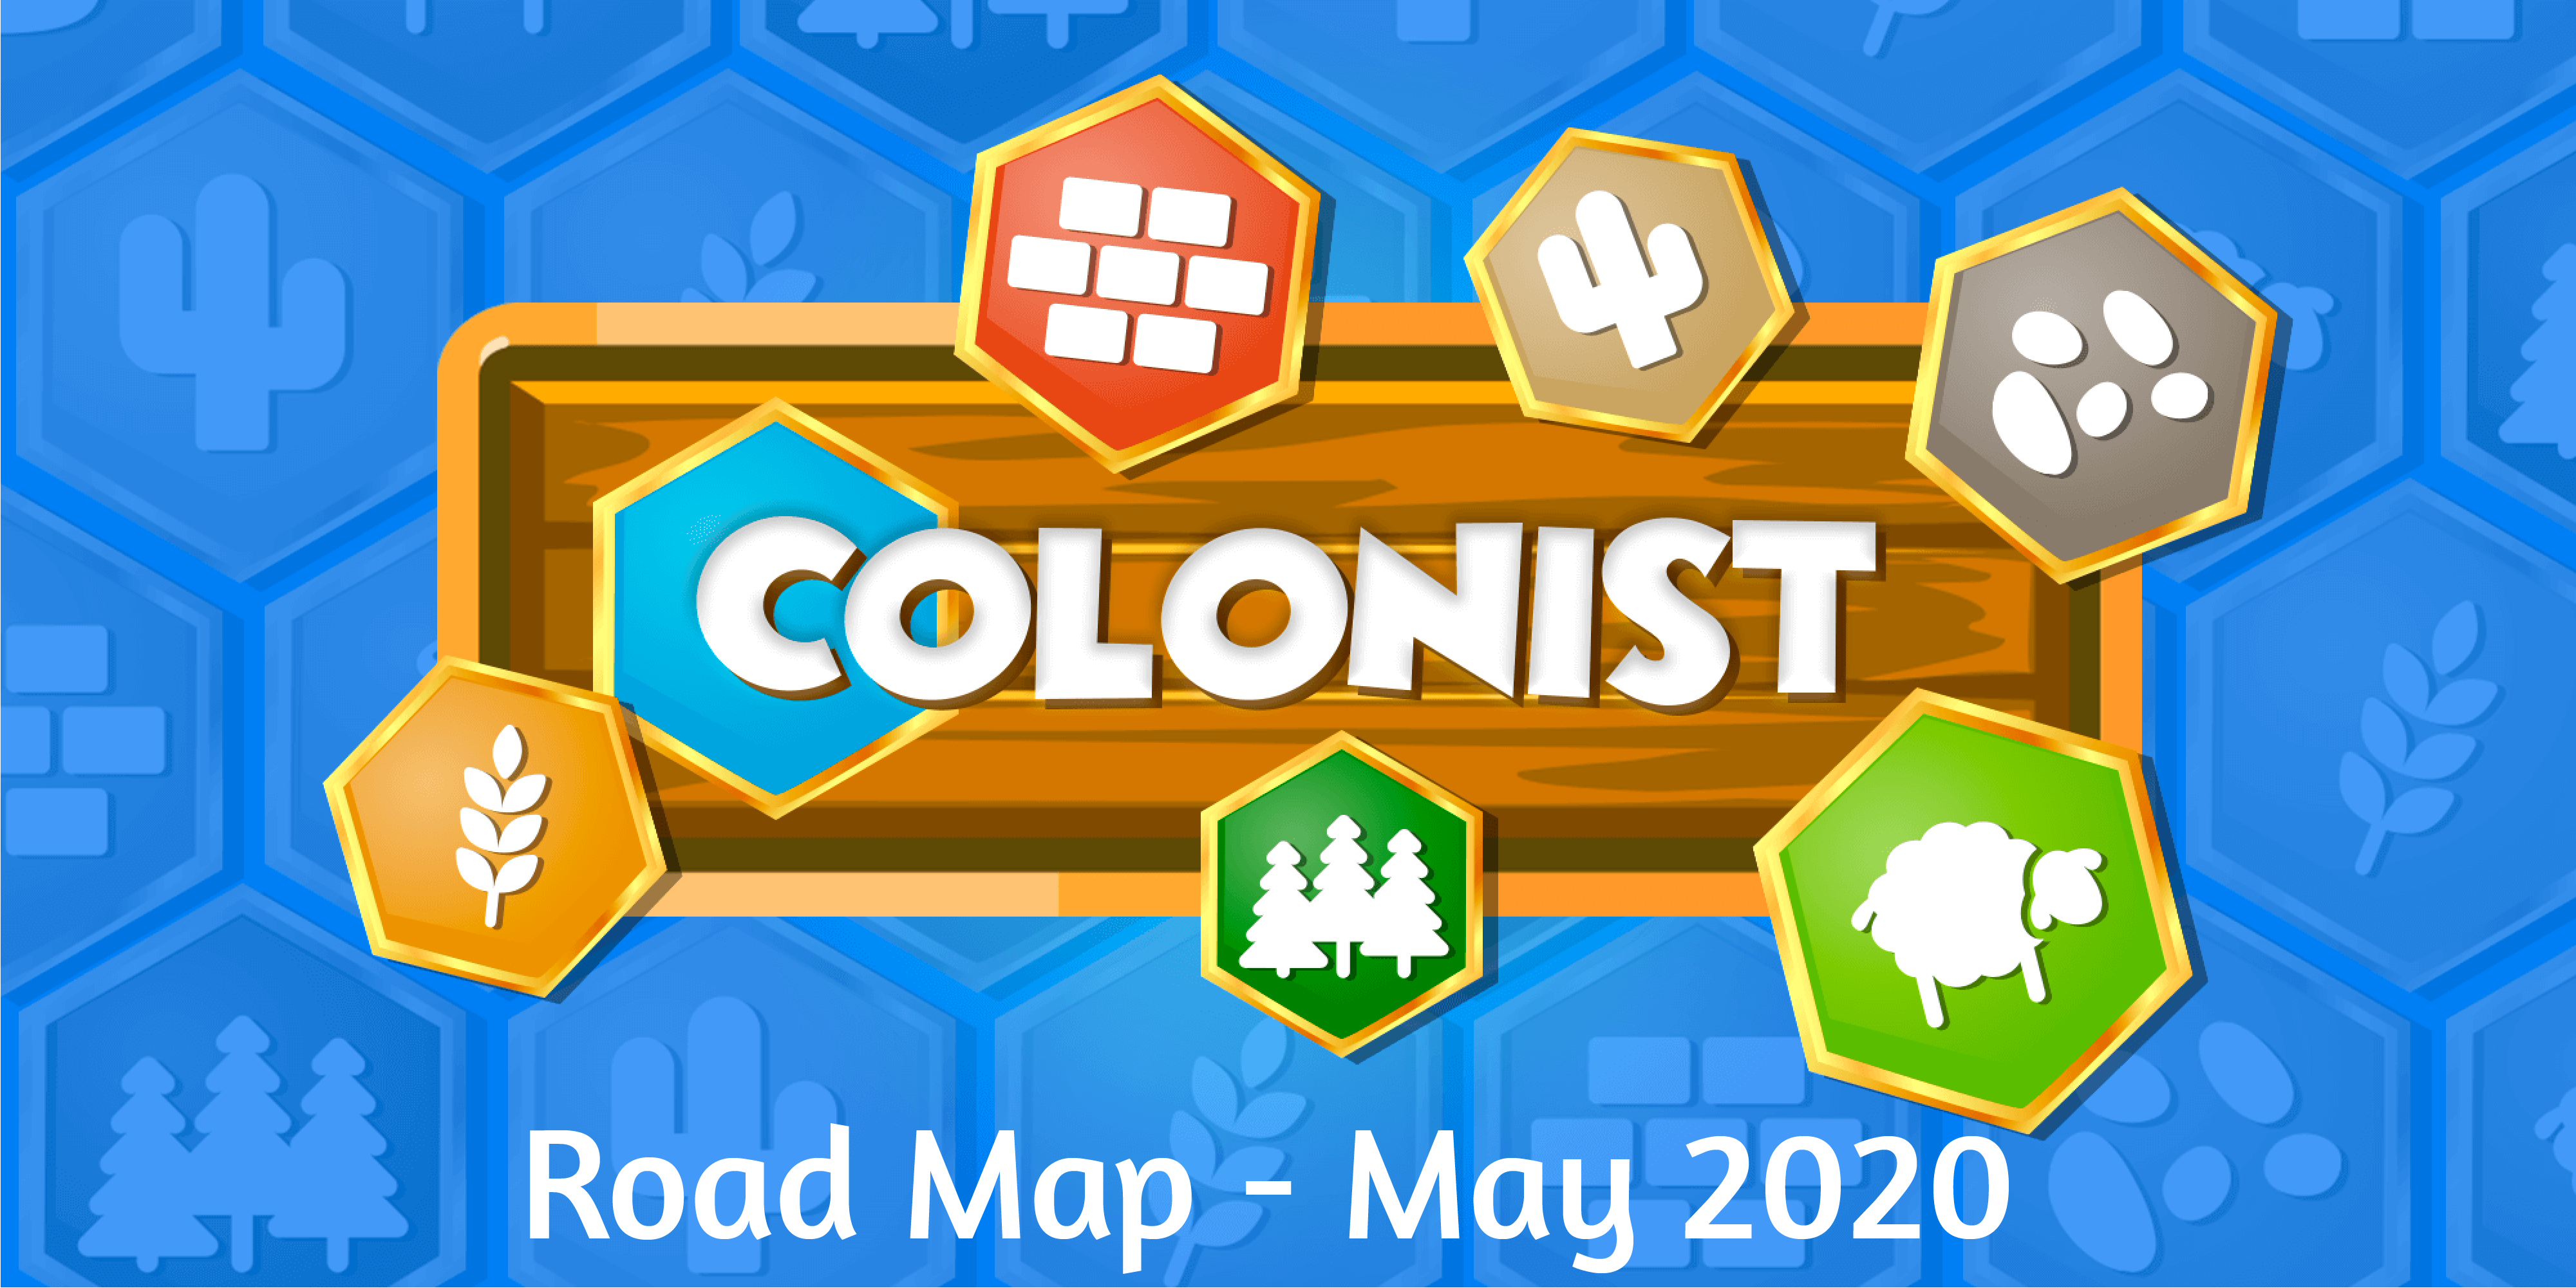 Colonist Road Map May 2020